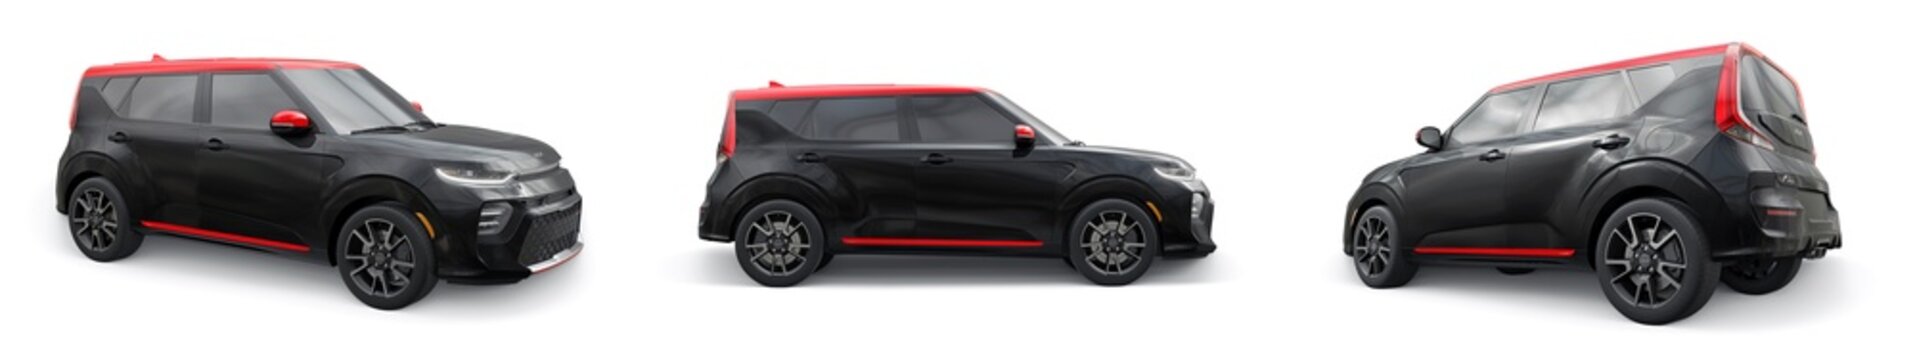 Dallas, USA. December 15, 2022. Set black Kia Soul GT-Line 2020 with a red roof and mirrors on a white background. Compact hatchback SUV with ultra modern youth design. 3d rendering.